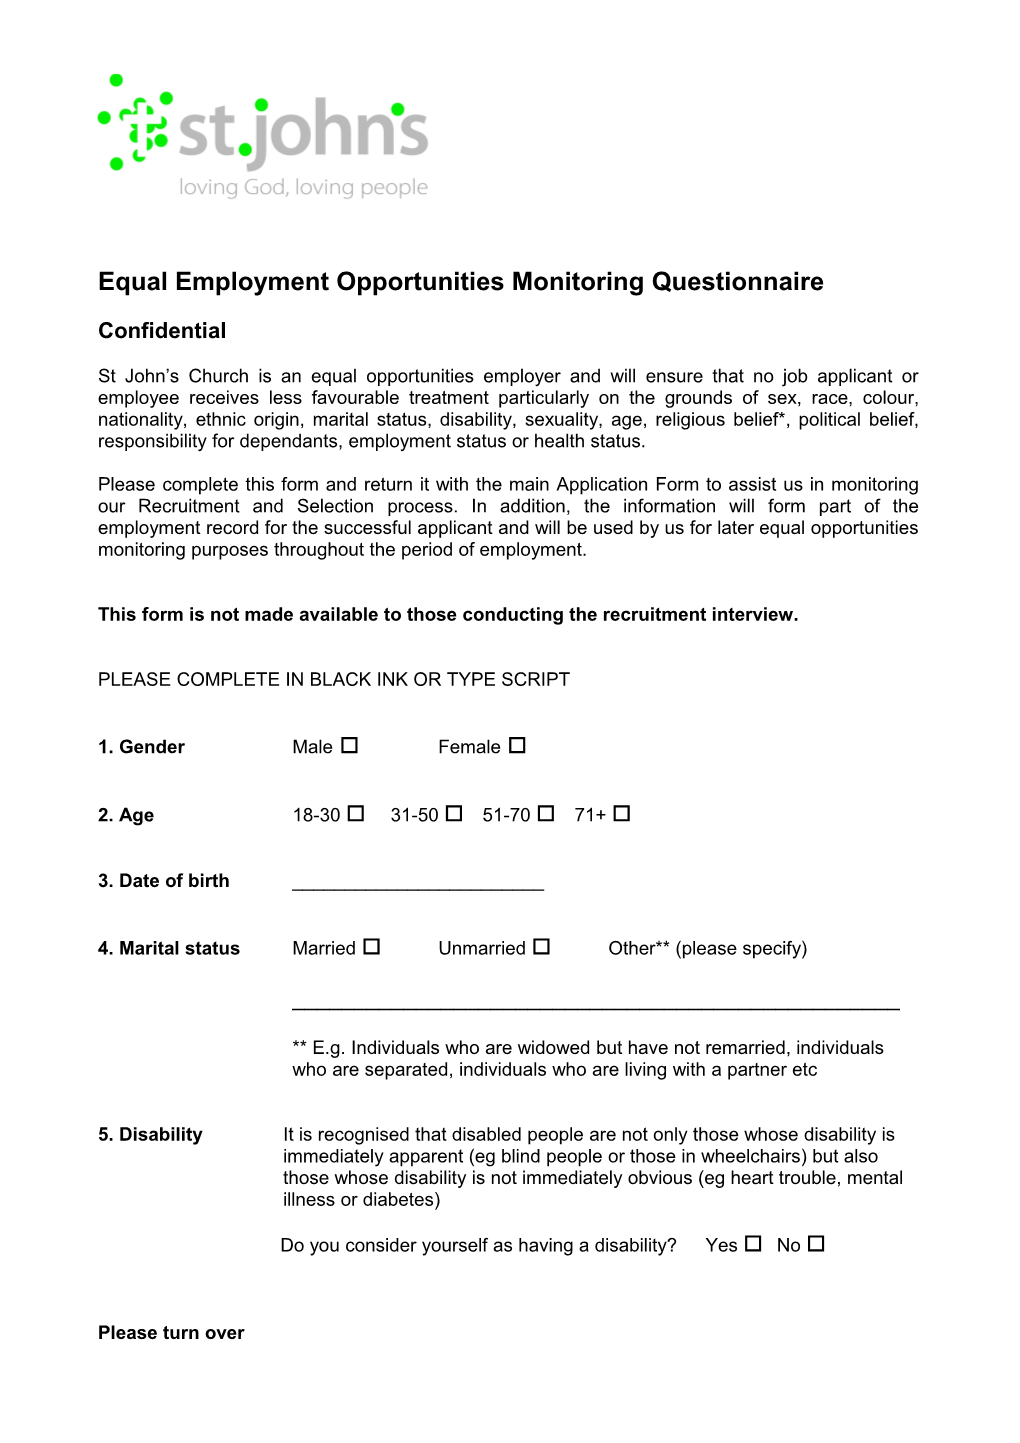 Equal Employment Opportunities Monitoring Questionnaire